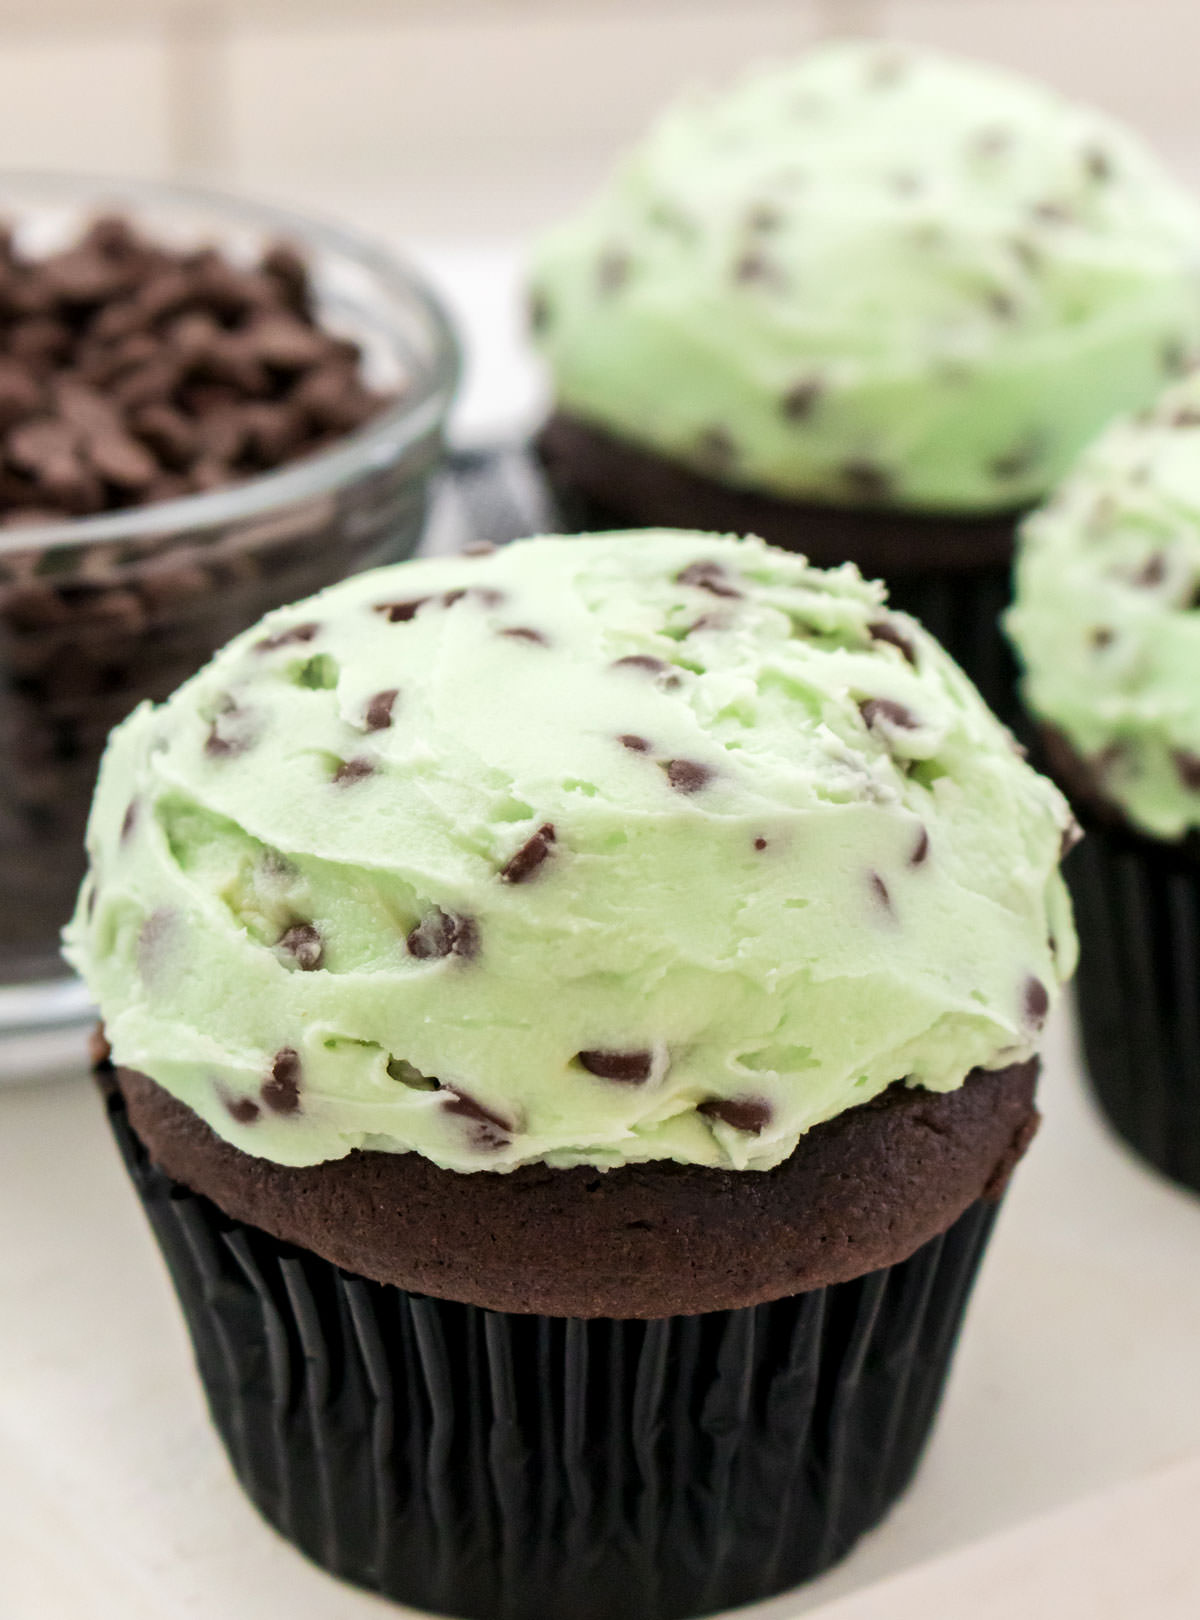 Closeup on three chocolate cupcakes frosted with Mint Chocolate Chip frosting sitting on a white table next to a bowl filled with chocolate chips.